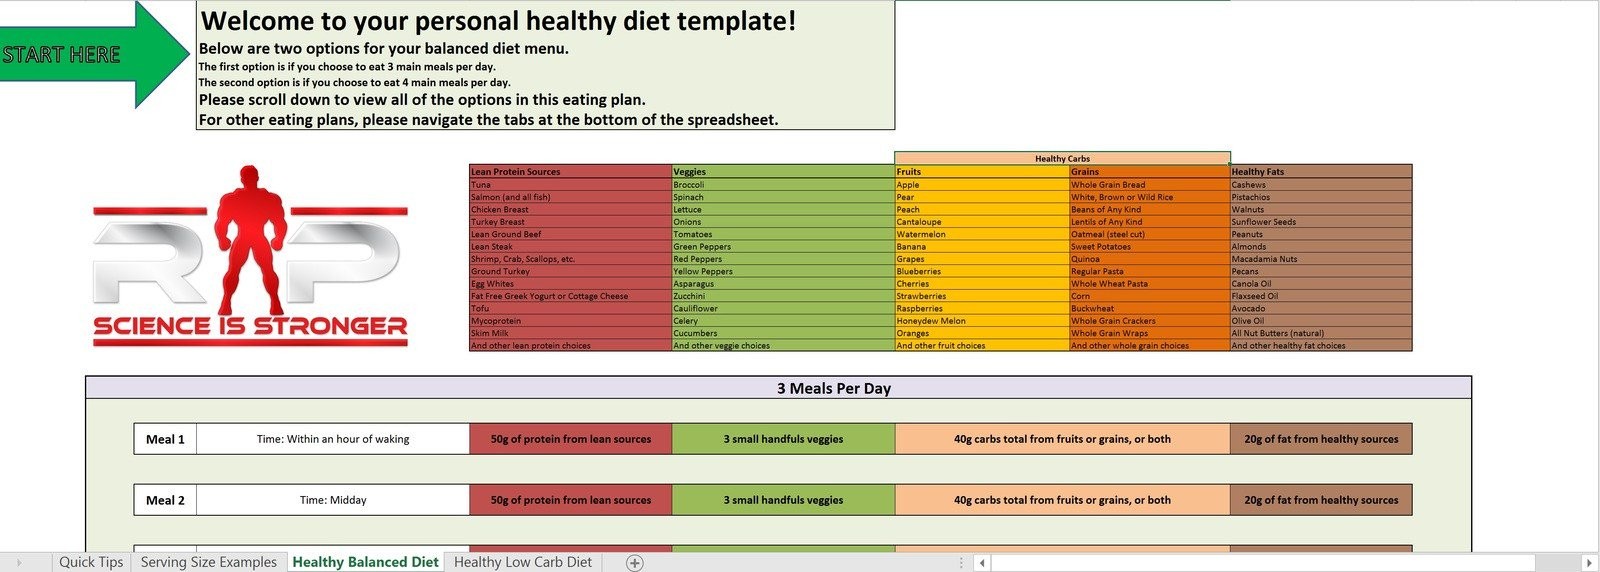 Renaissance Periodization Healthy Diet Templates What Is Rp